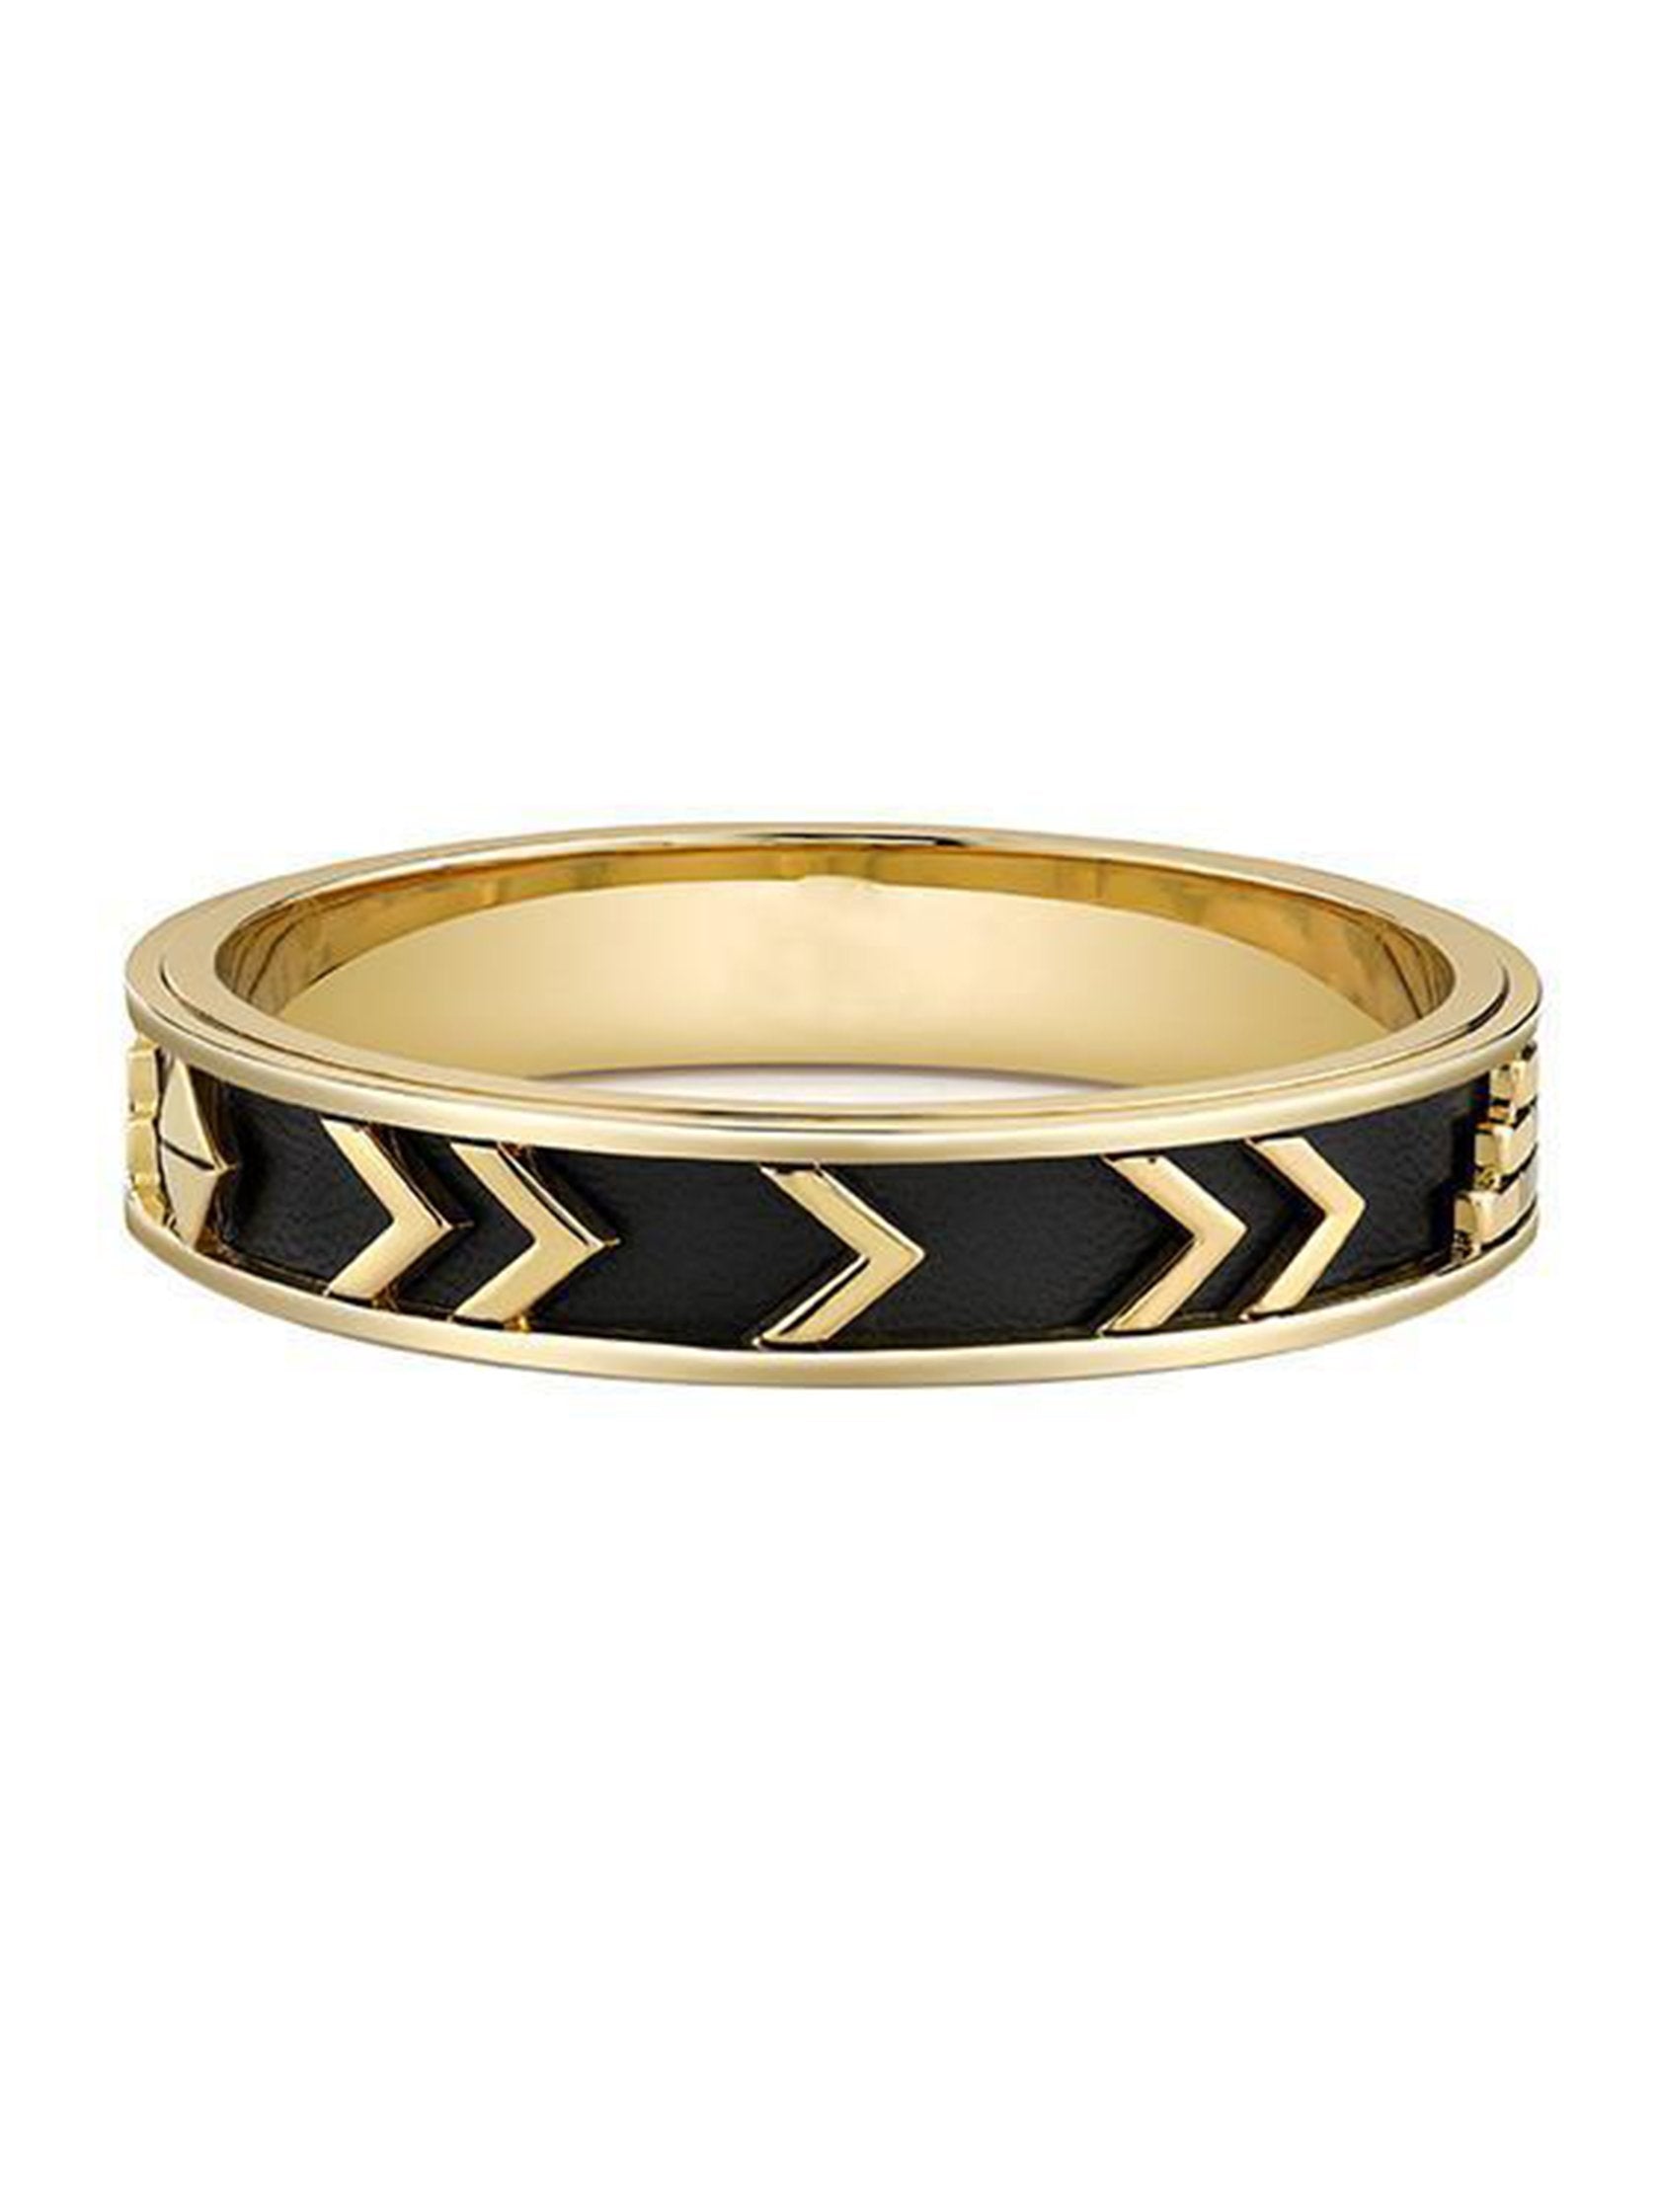 Women outfit in a bracelet rental from House of Harlow 1960 called Aztec Bangle